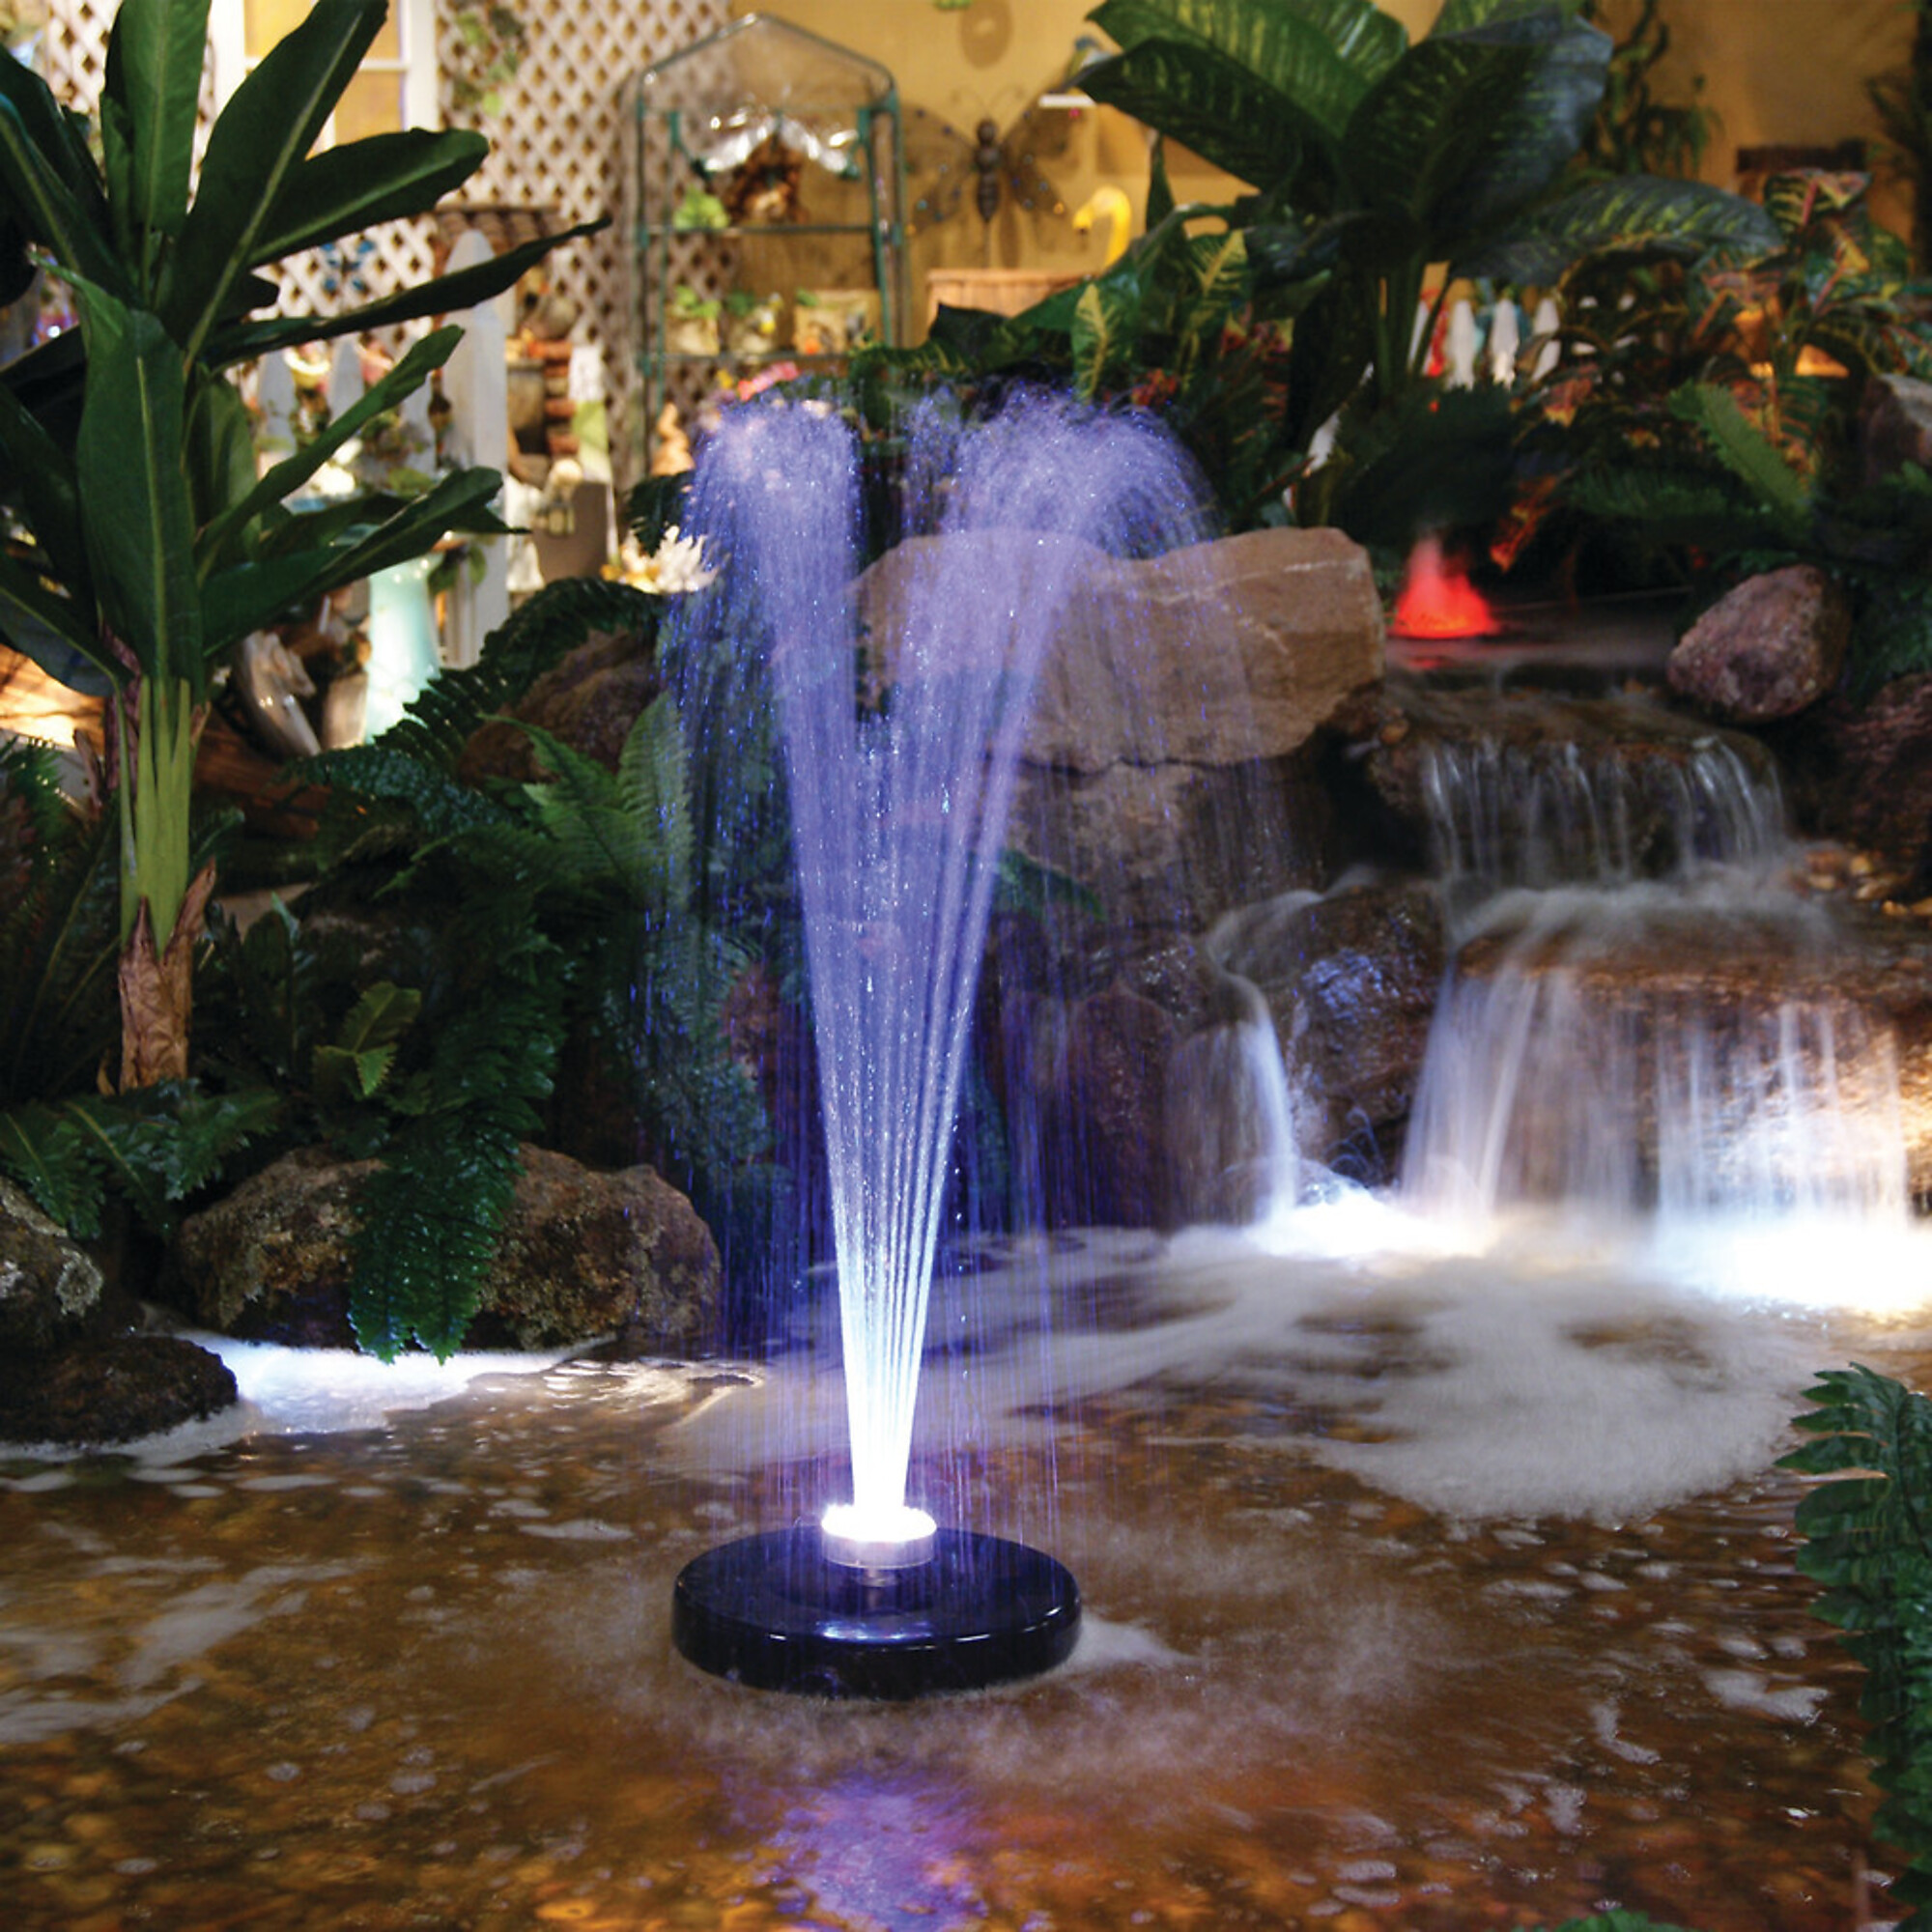 Alpine Corporation, Floating Spray Fountain w/ 48 LED Colorful Lights, Model FTC102